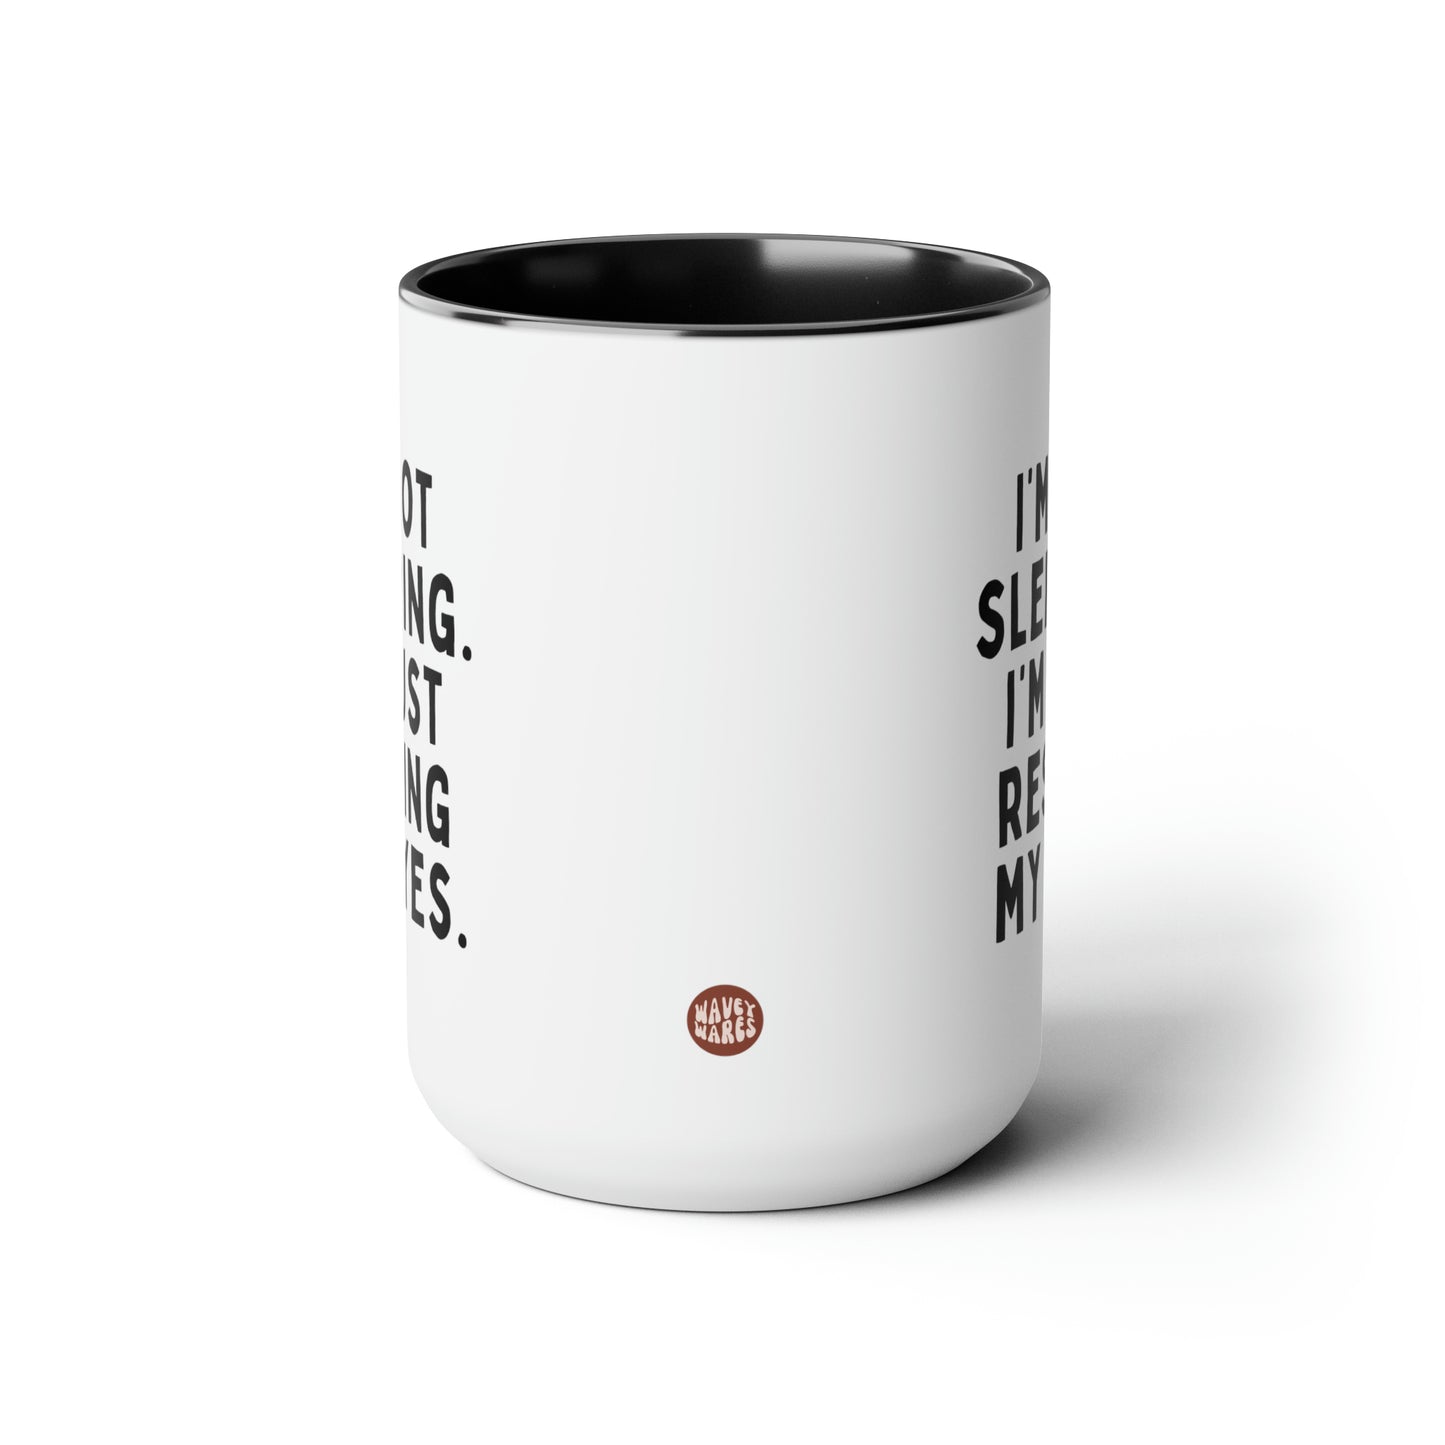 I'm Not Sleeping. I'm Just Resting My Eyes. 15oz white with black accent funny large coffee mug gift for dad fathers day daddy husband grandpa cup him waveywares wavey wares wavywares wavy wares side